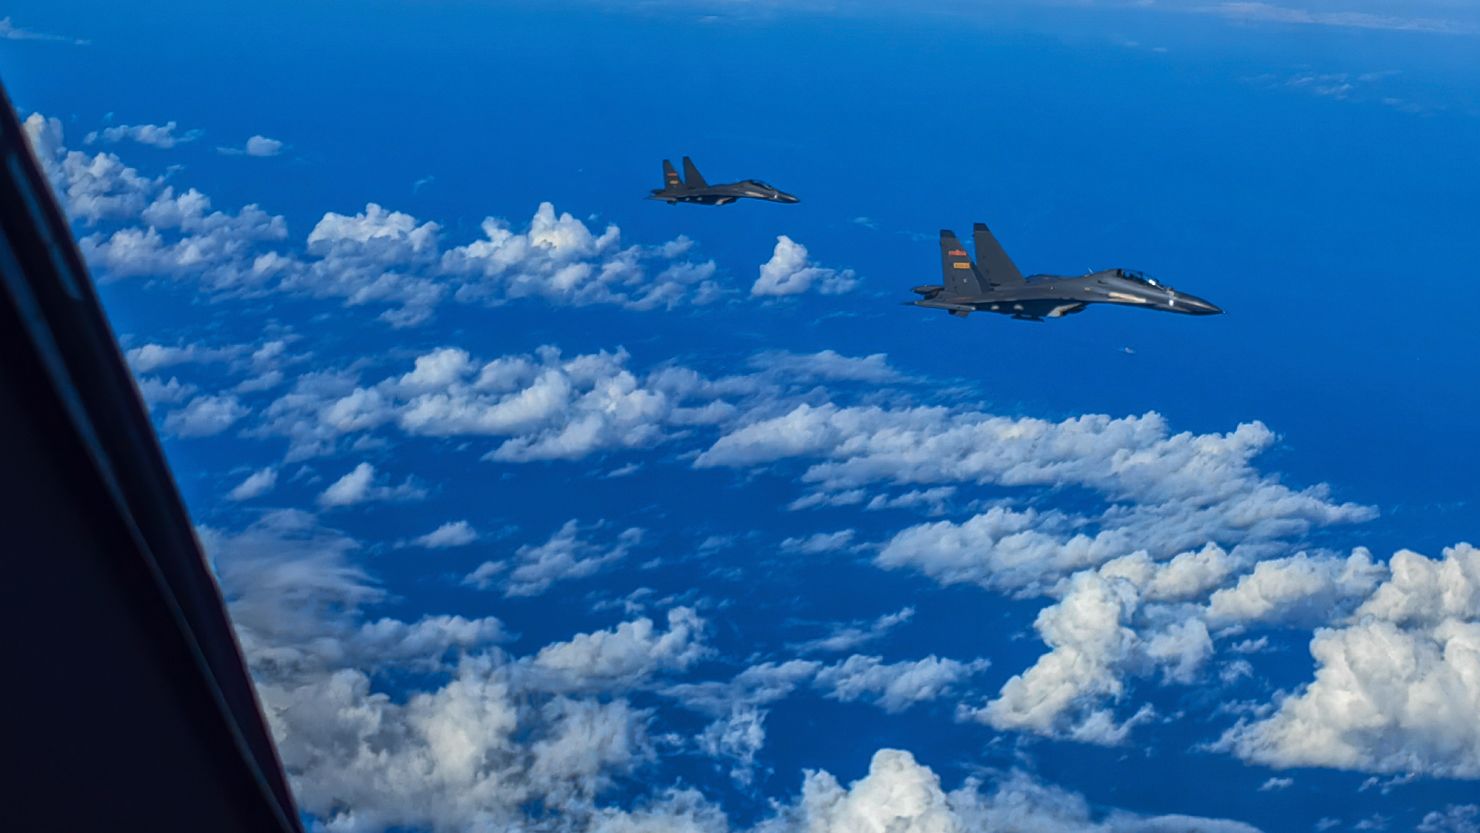 Fighter jets of the Eastern Theater Command of the Chinese People's Liberation Army conduct joint combat training exercises around the island of Taiwan on August 7, 2022.